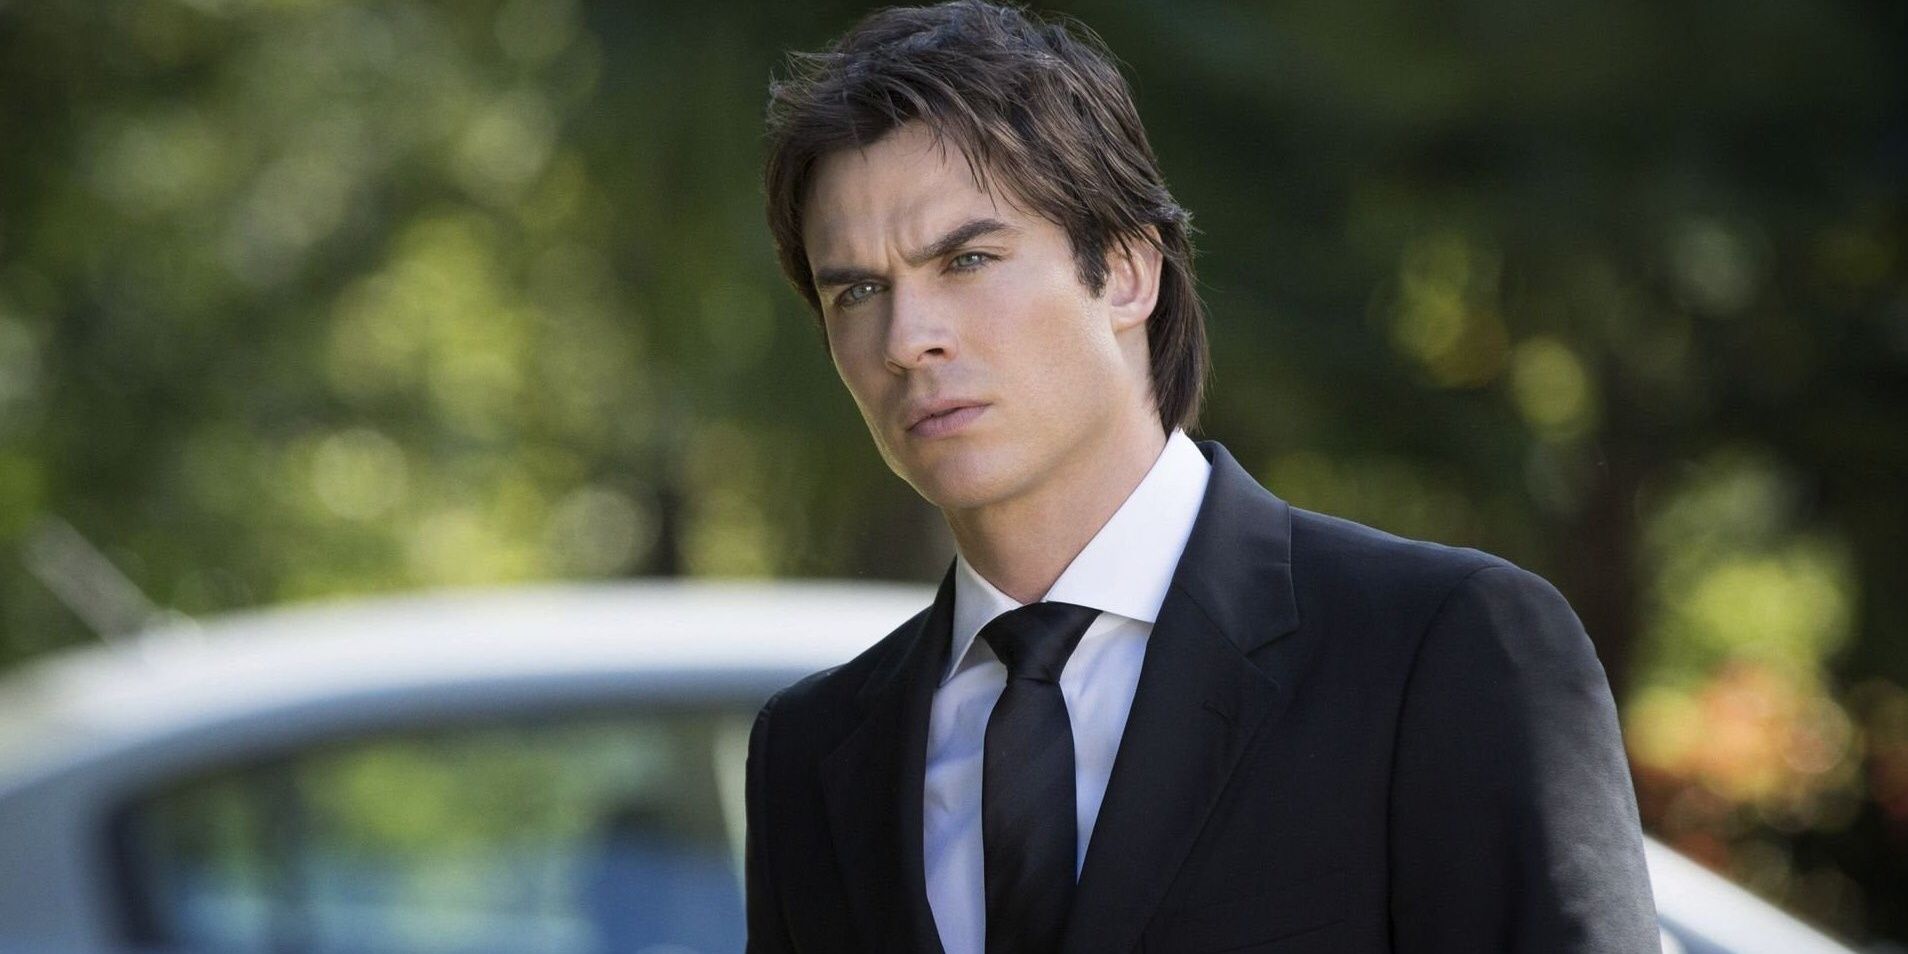 Damon in a suit looking to the distance in The Vampire Diaries.